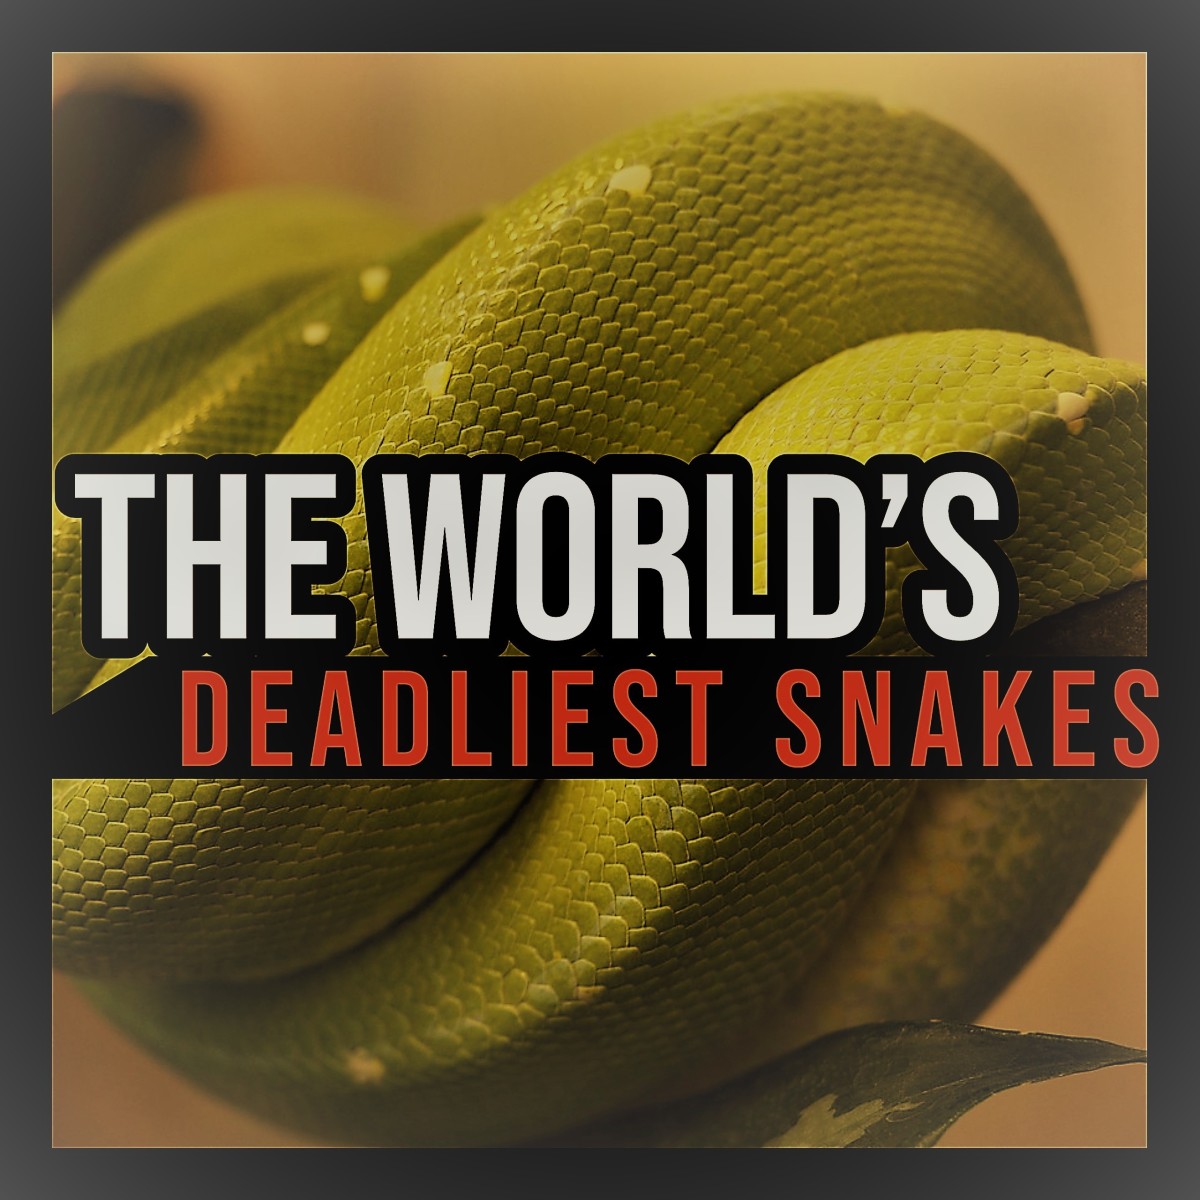 The 25 Deadliest Snakes Ranked